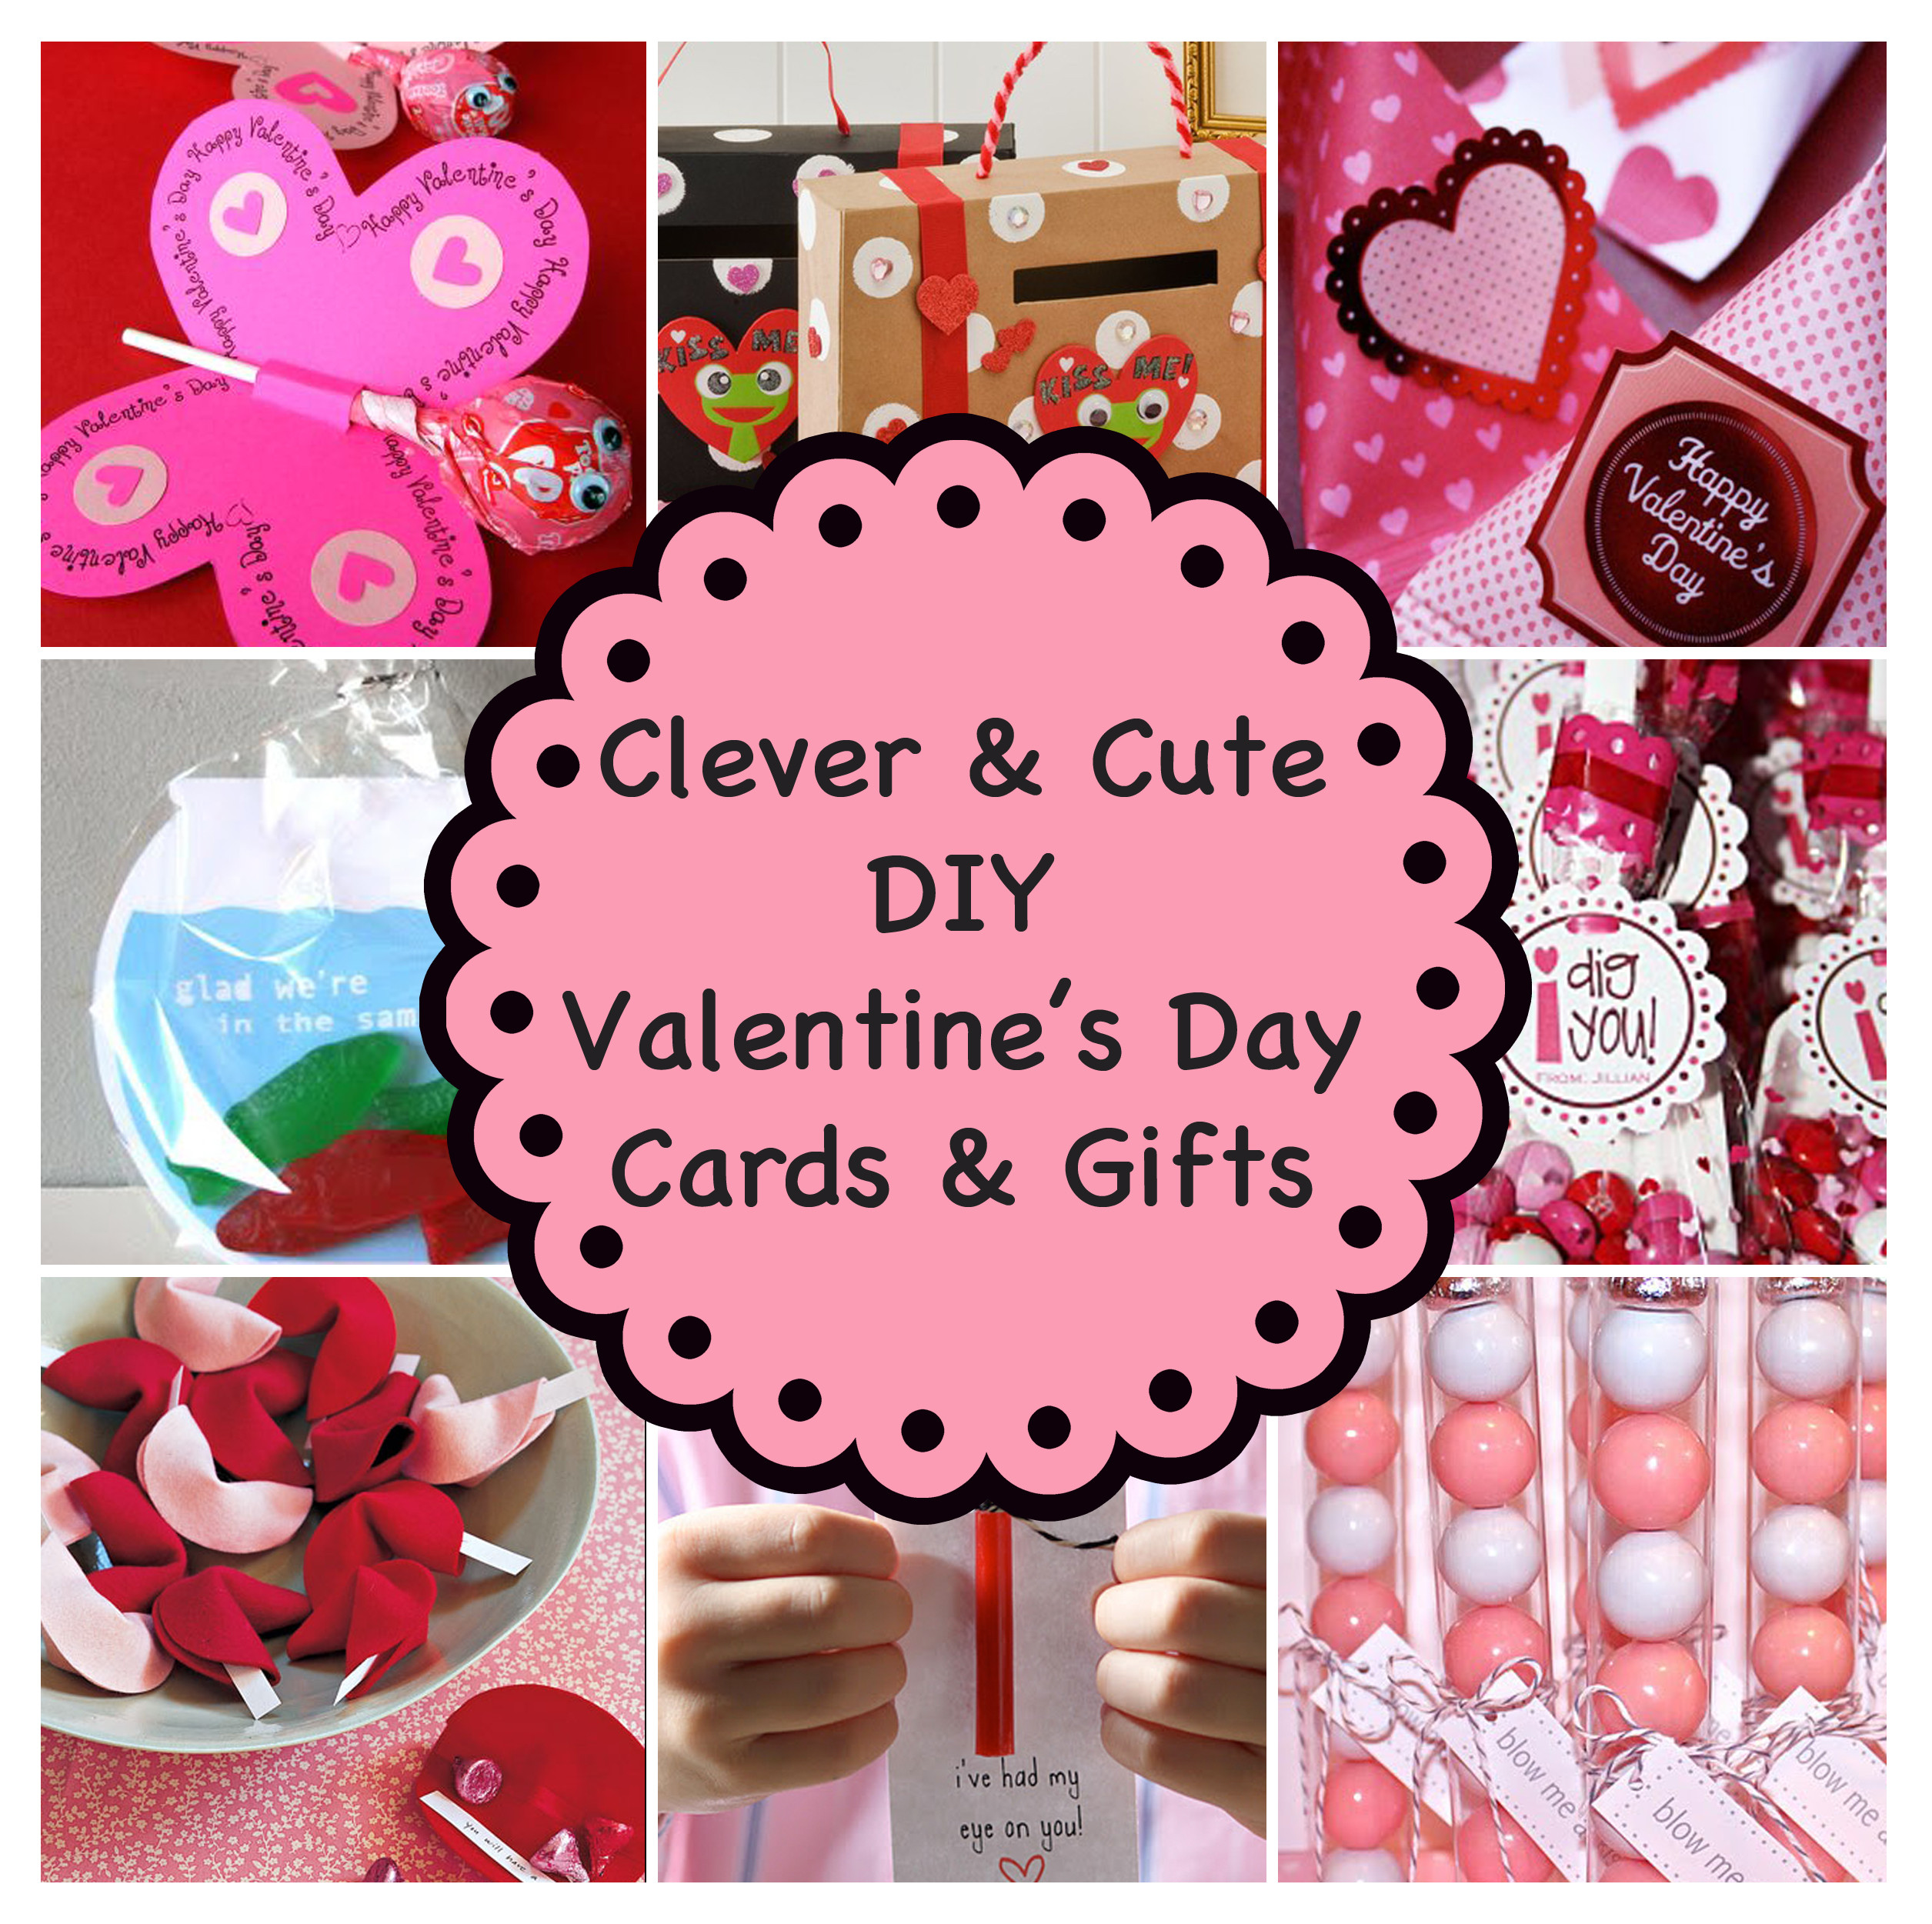 Cute Valentines Day Card Ideas
 Clever and Cute DIY Valentine’s Day Cards & Gifts